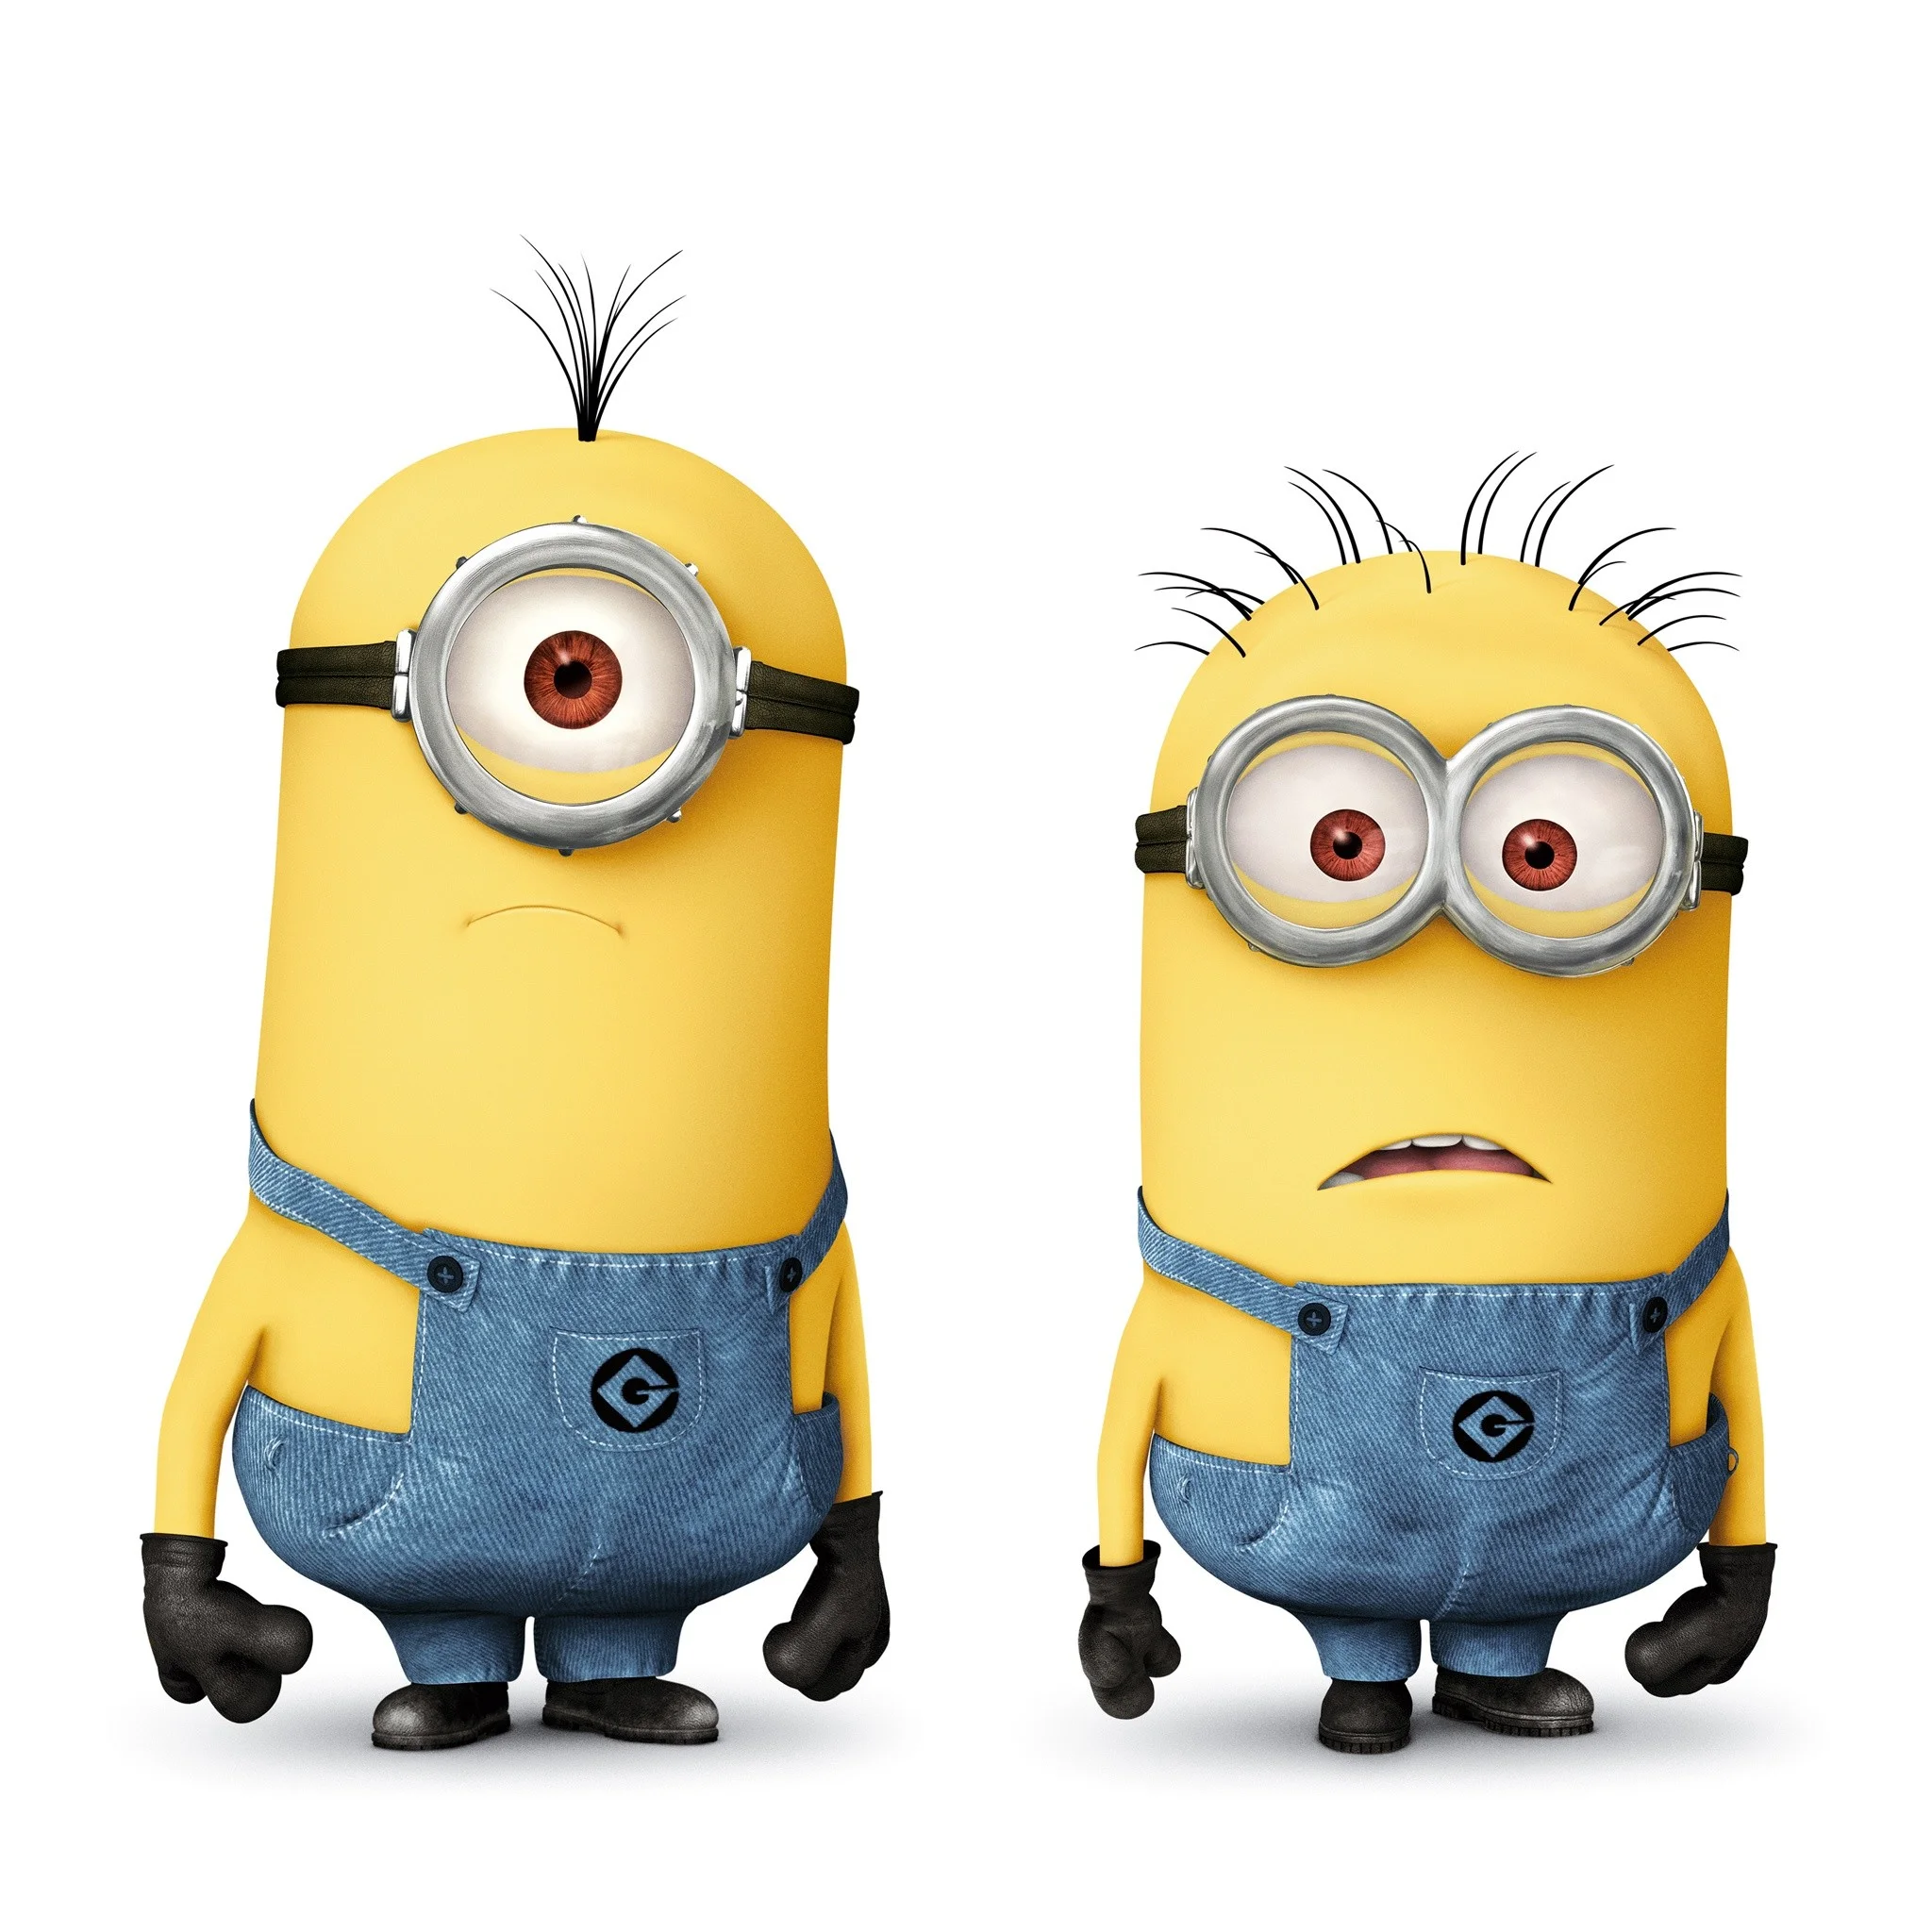 Minions Minions in Despicable Me 2 HD Wallpaper – iHD Wallpapers